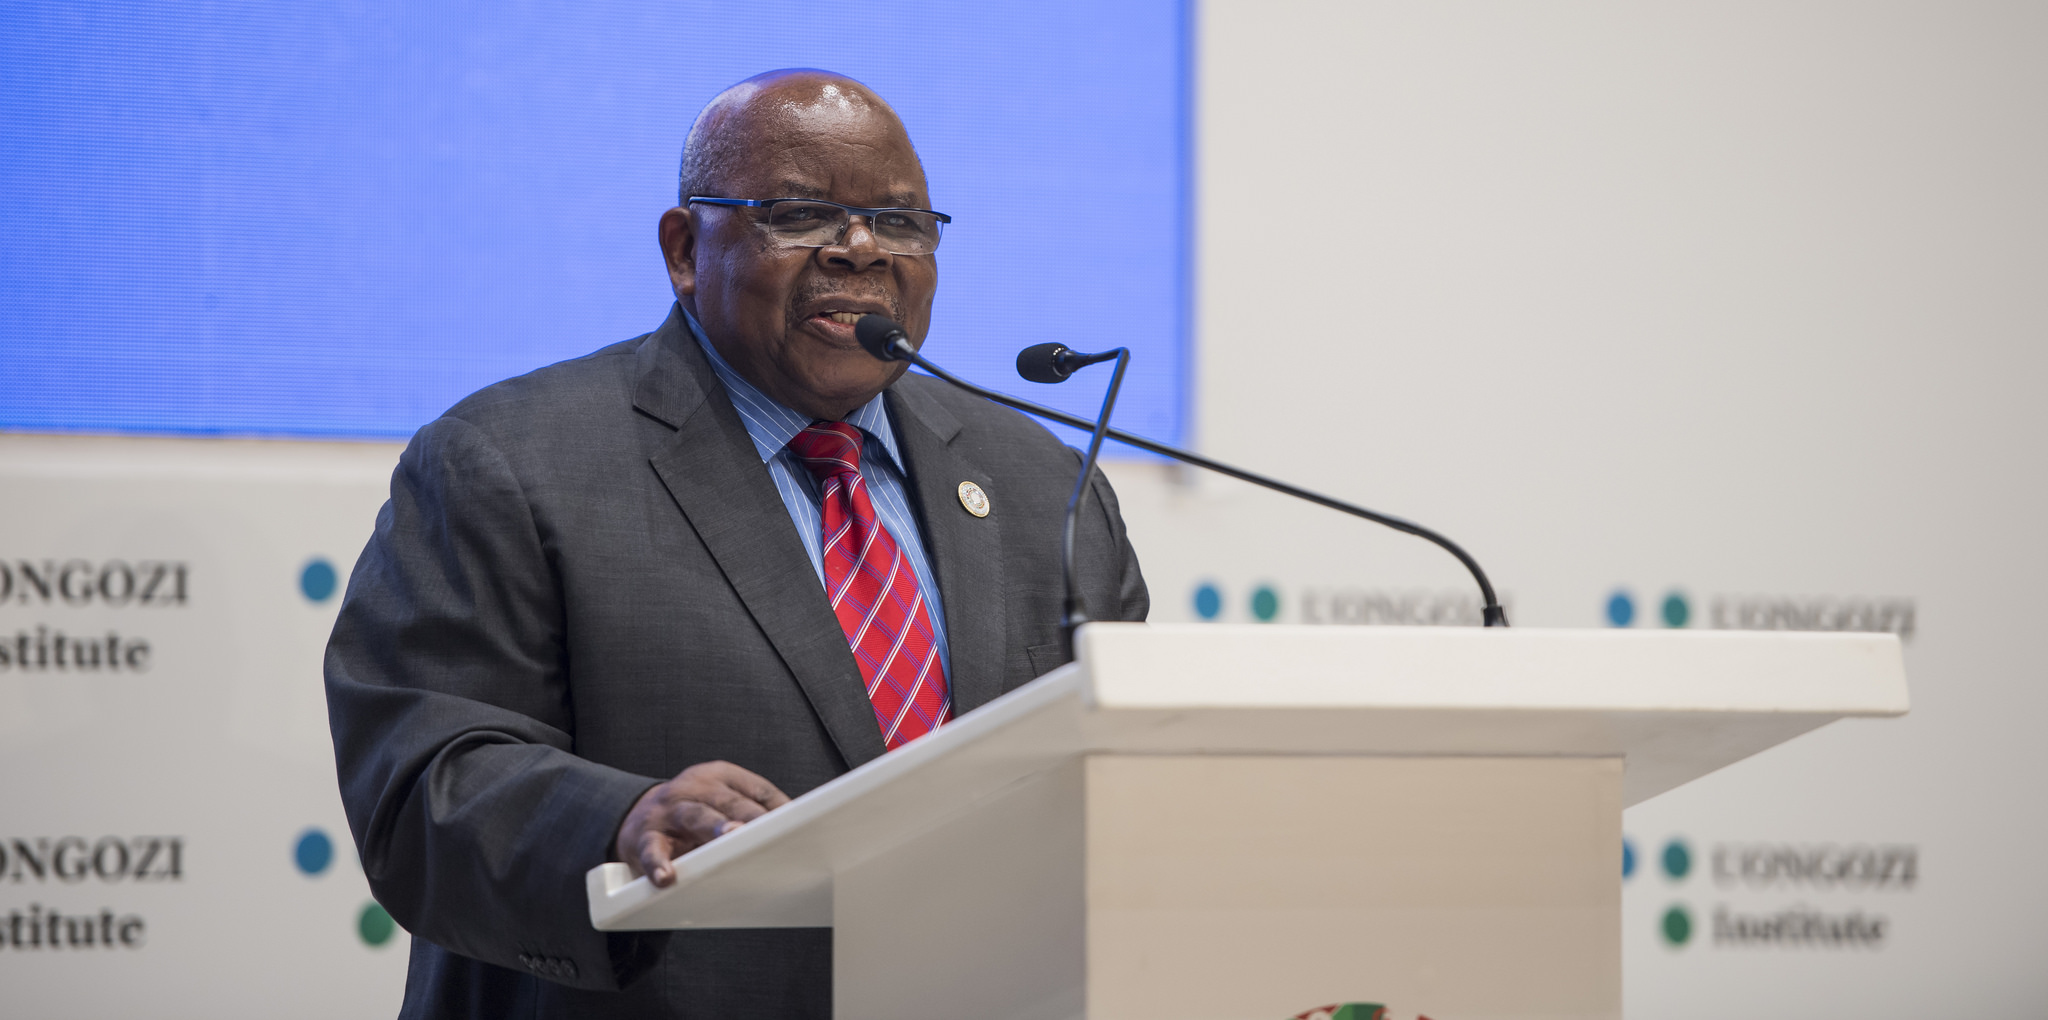 Former Tanzanian president Benjamin William Mkapa addresses delegates at the opening of the two-day leadership summit at Kigali Convention Centre in Kigali yesterday. Village Urugwiro.